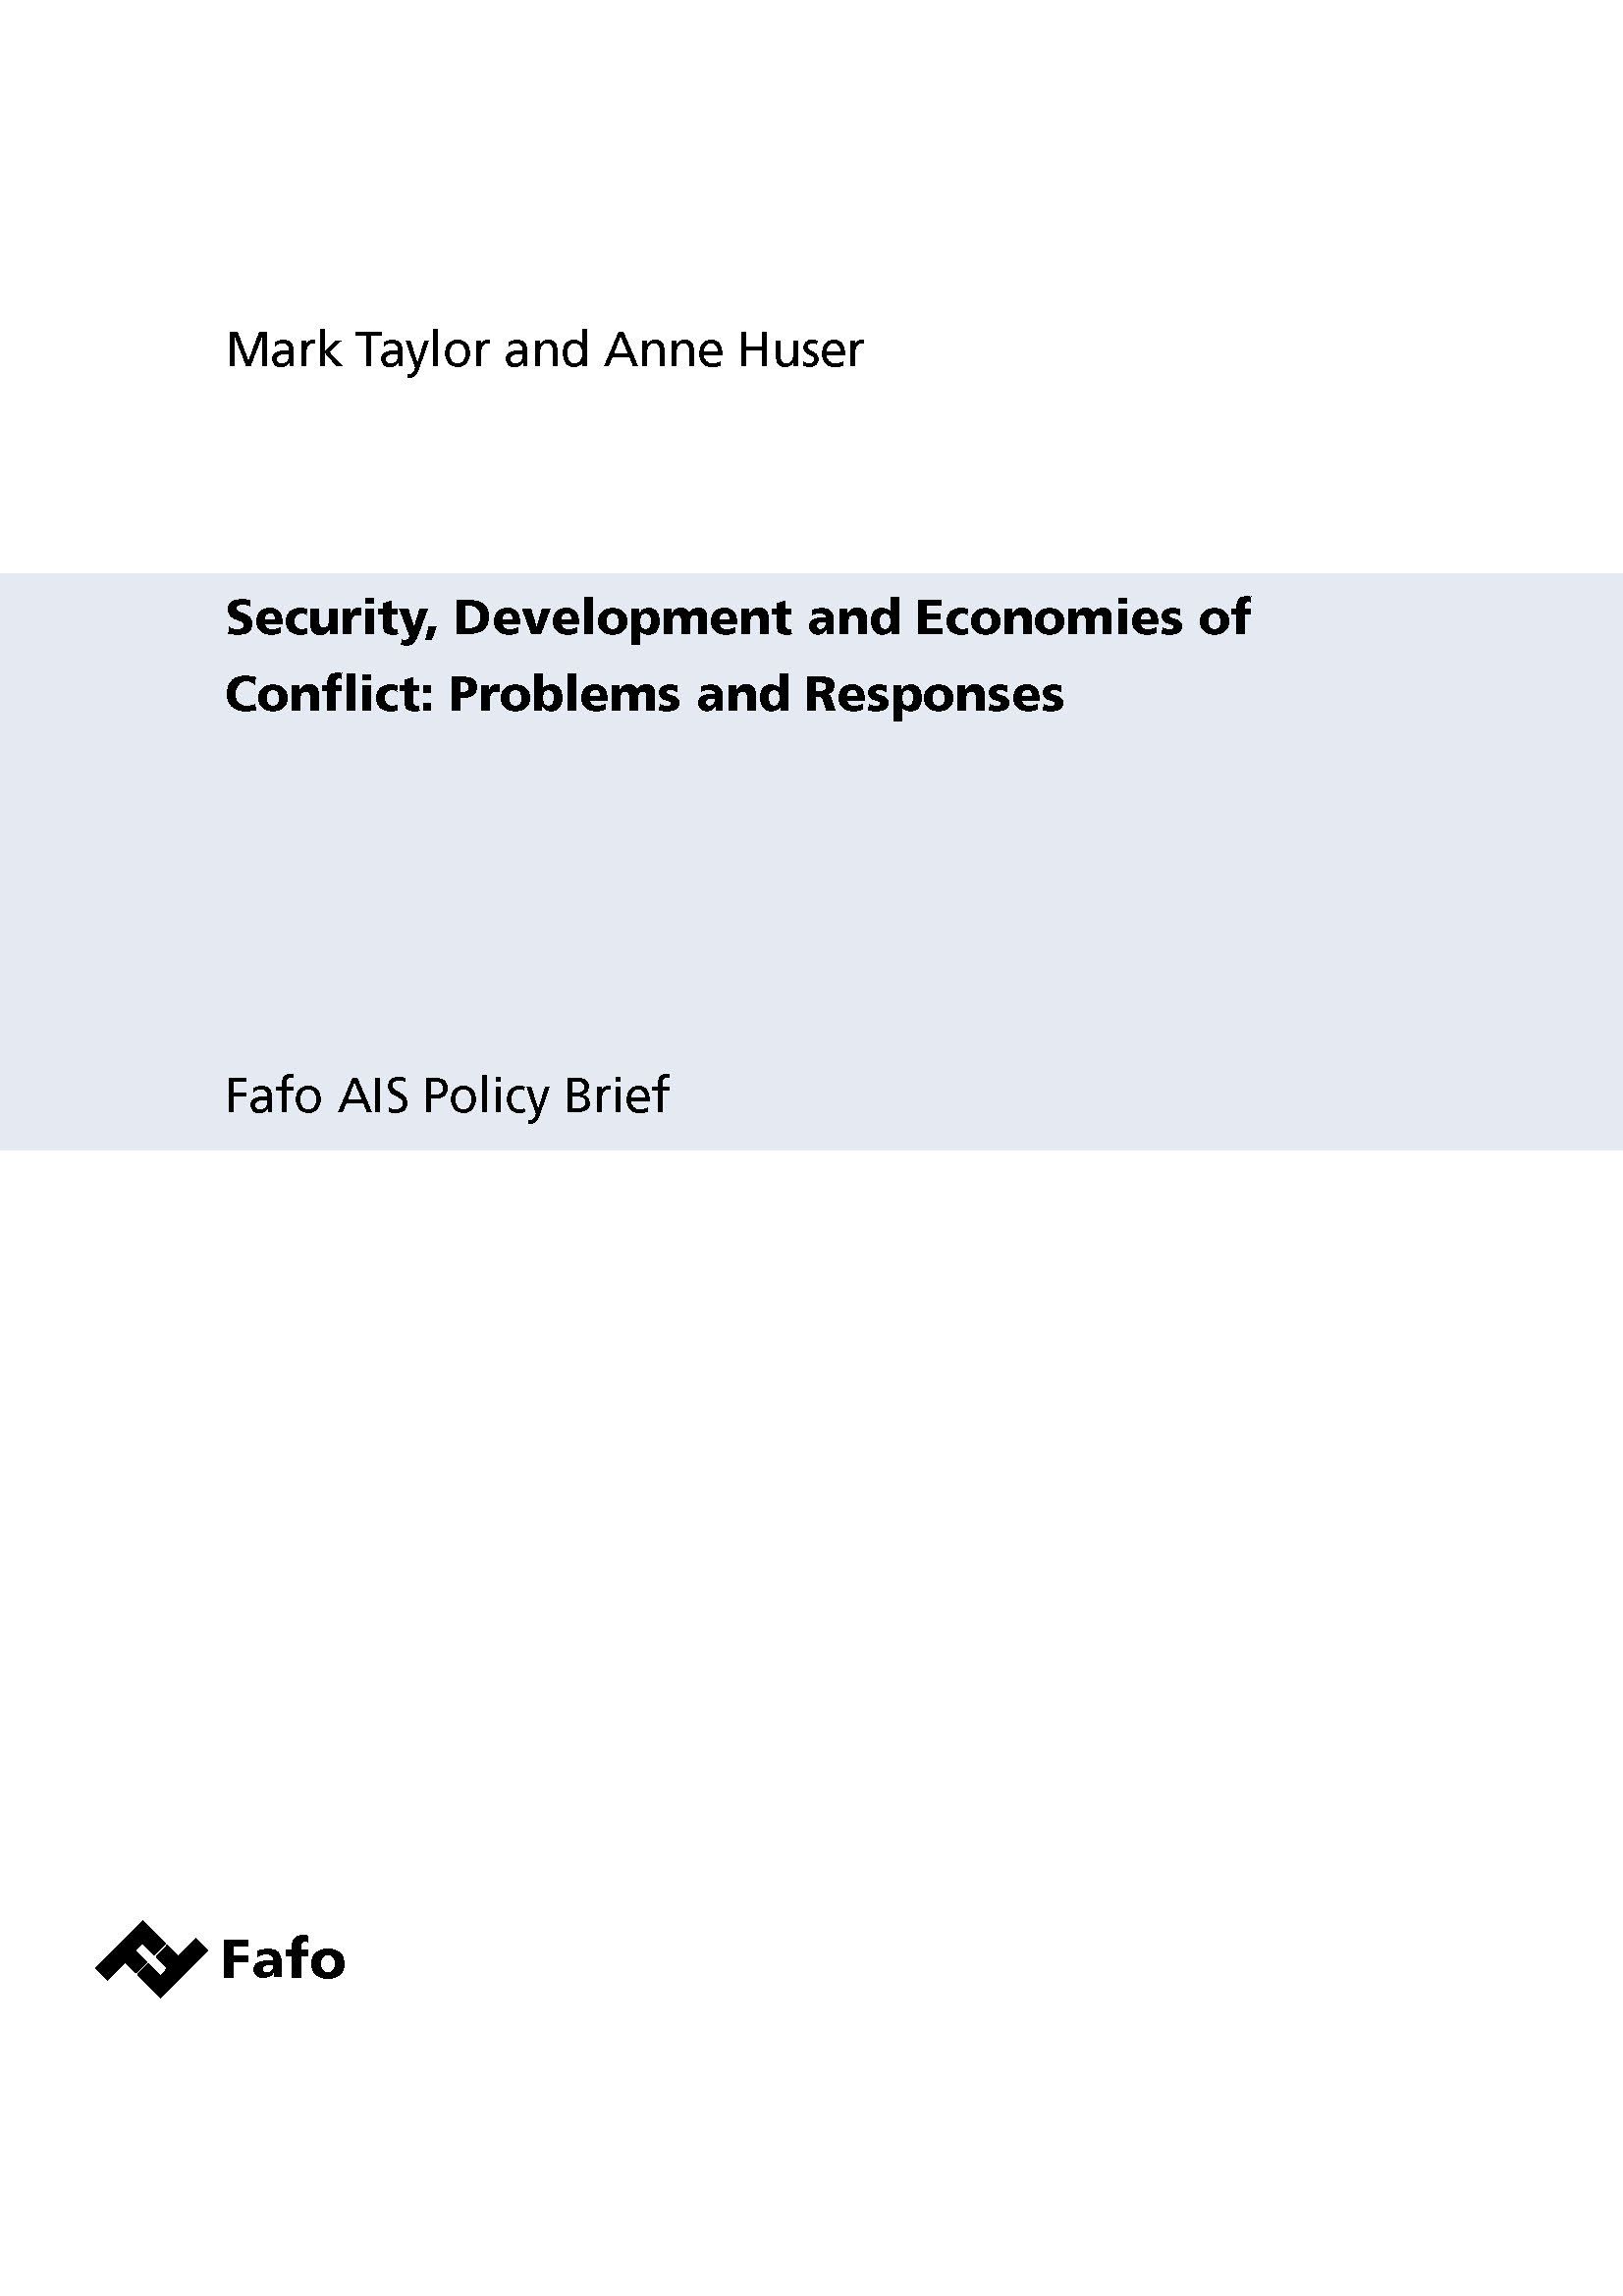 Security, Development and Economies of Conflict: Problems and Responses